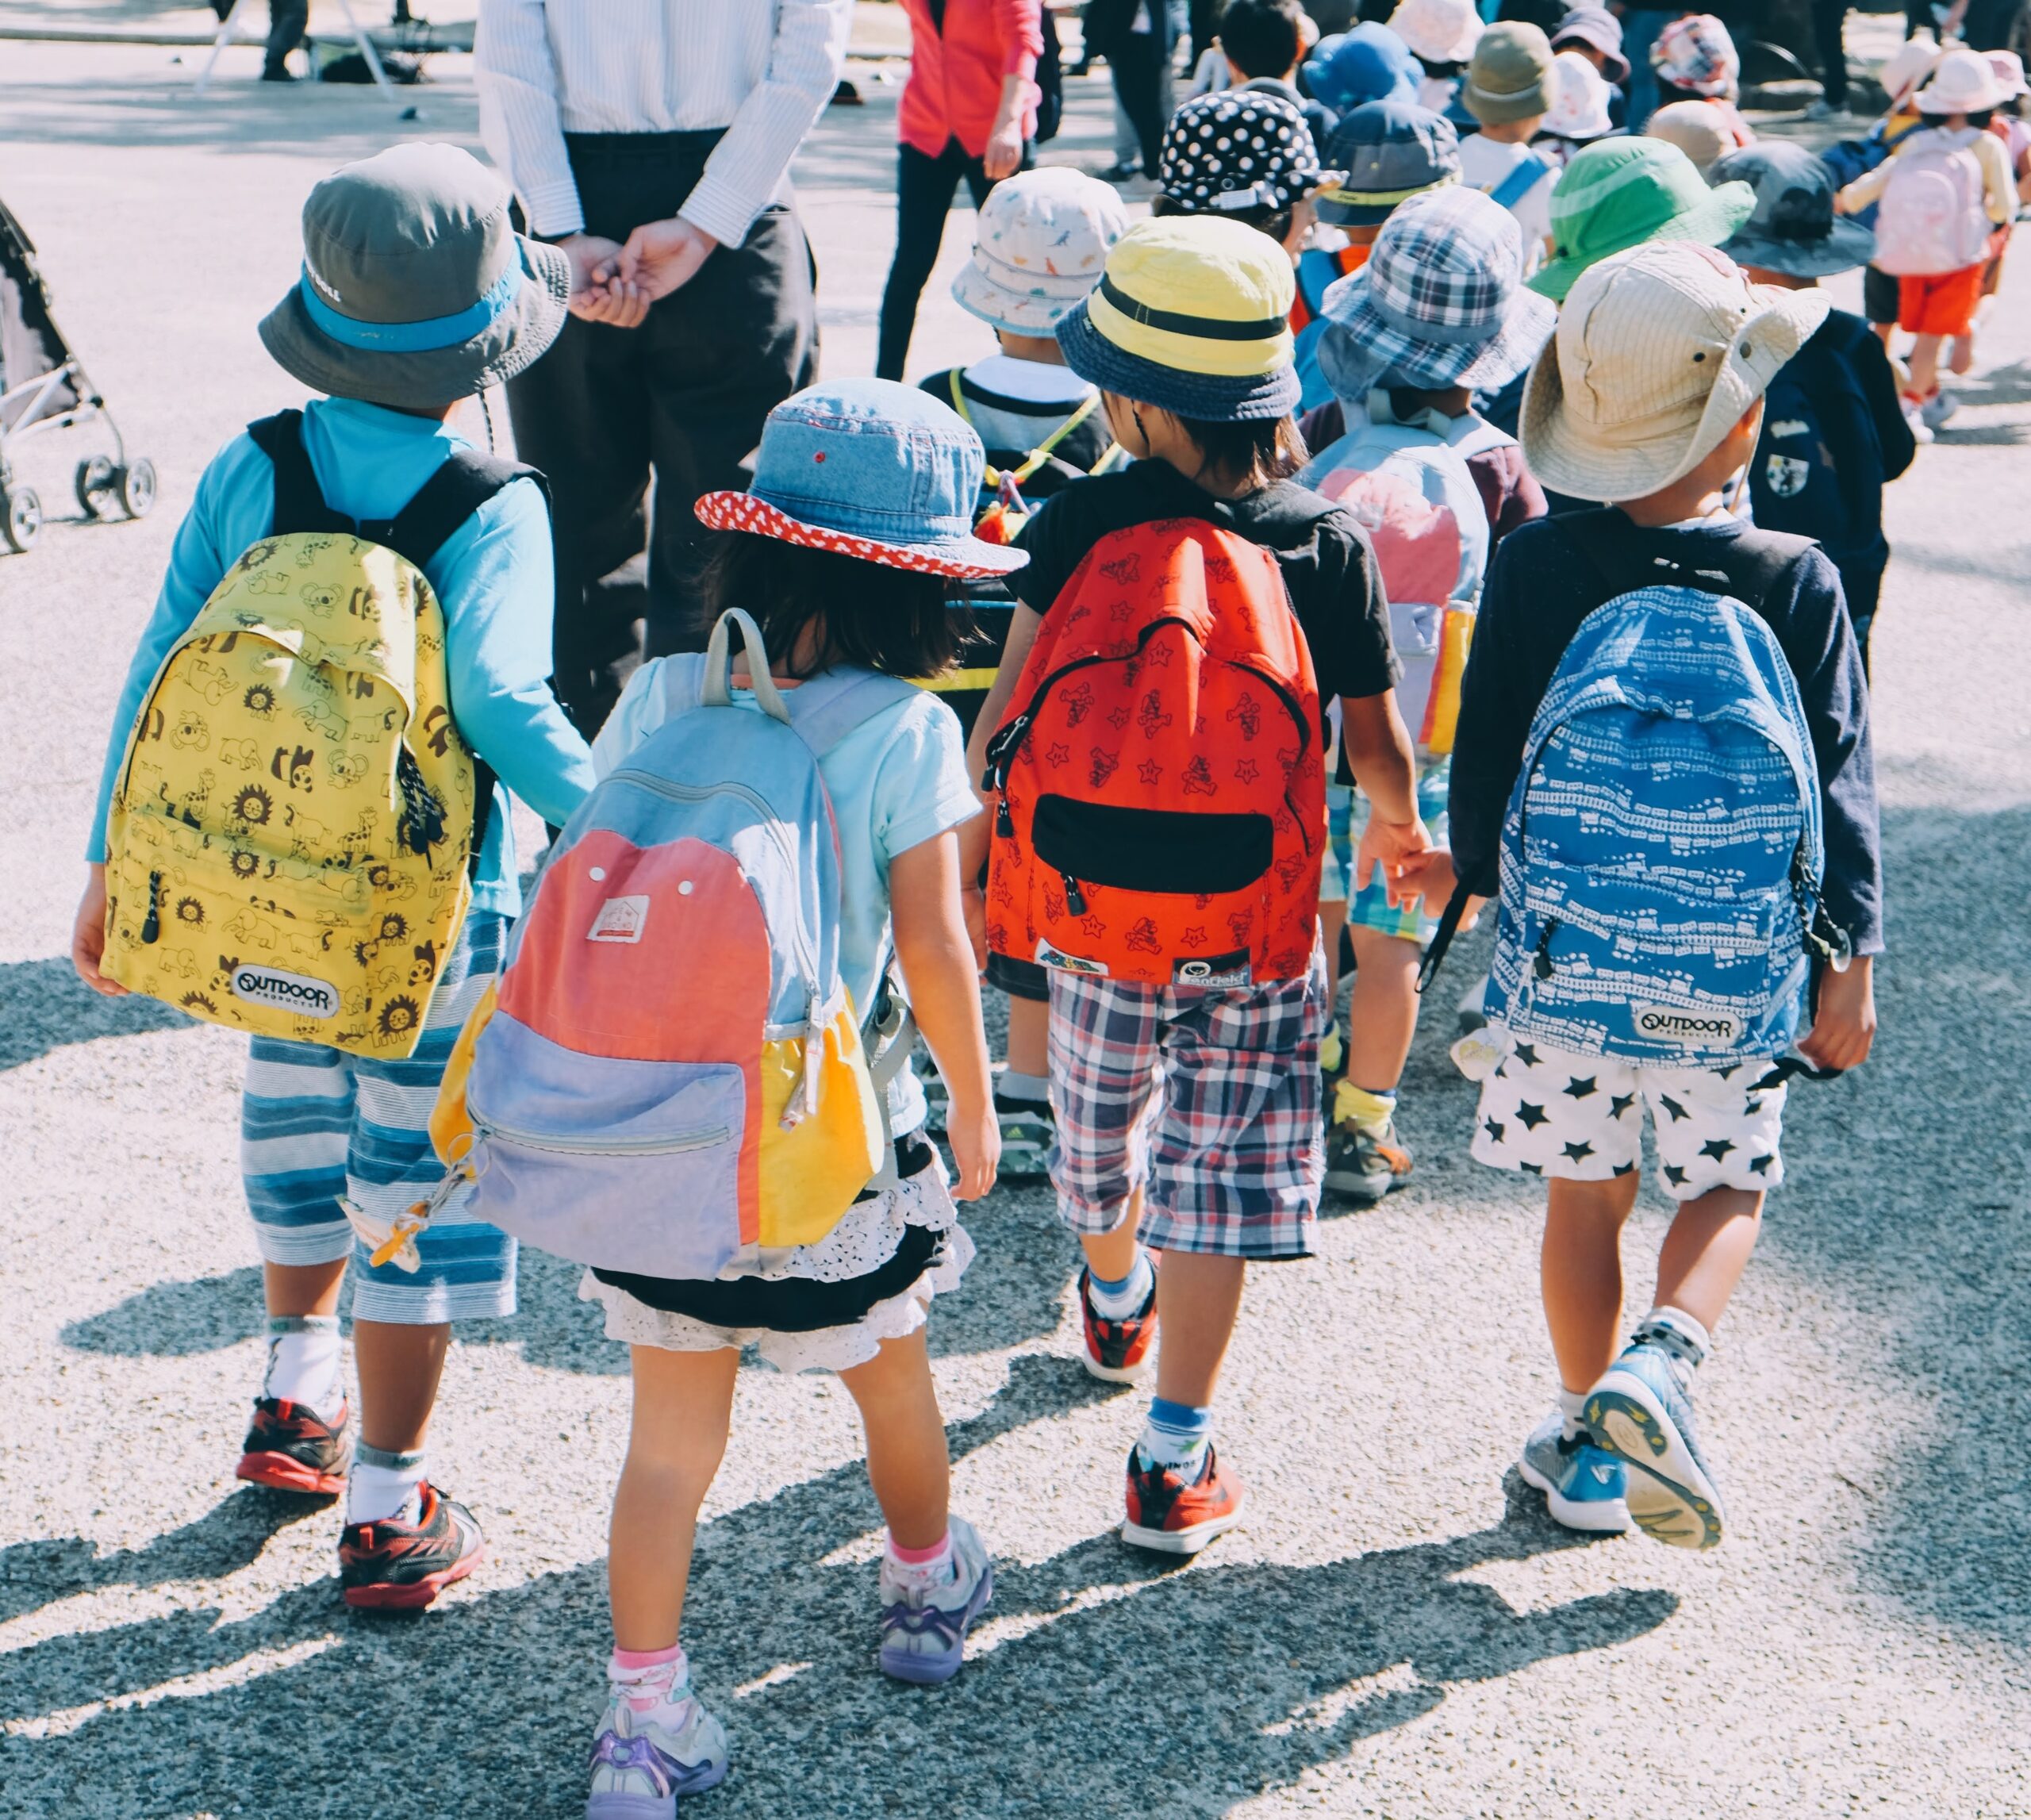 Group of children wearing backpacks and walking together